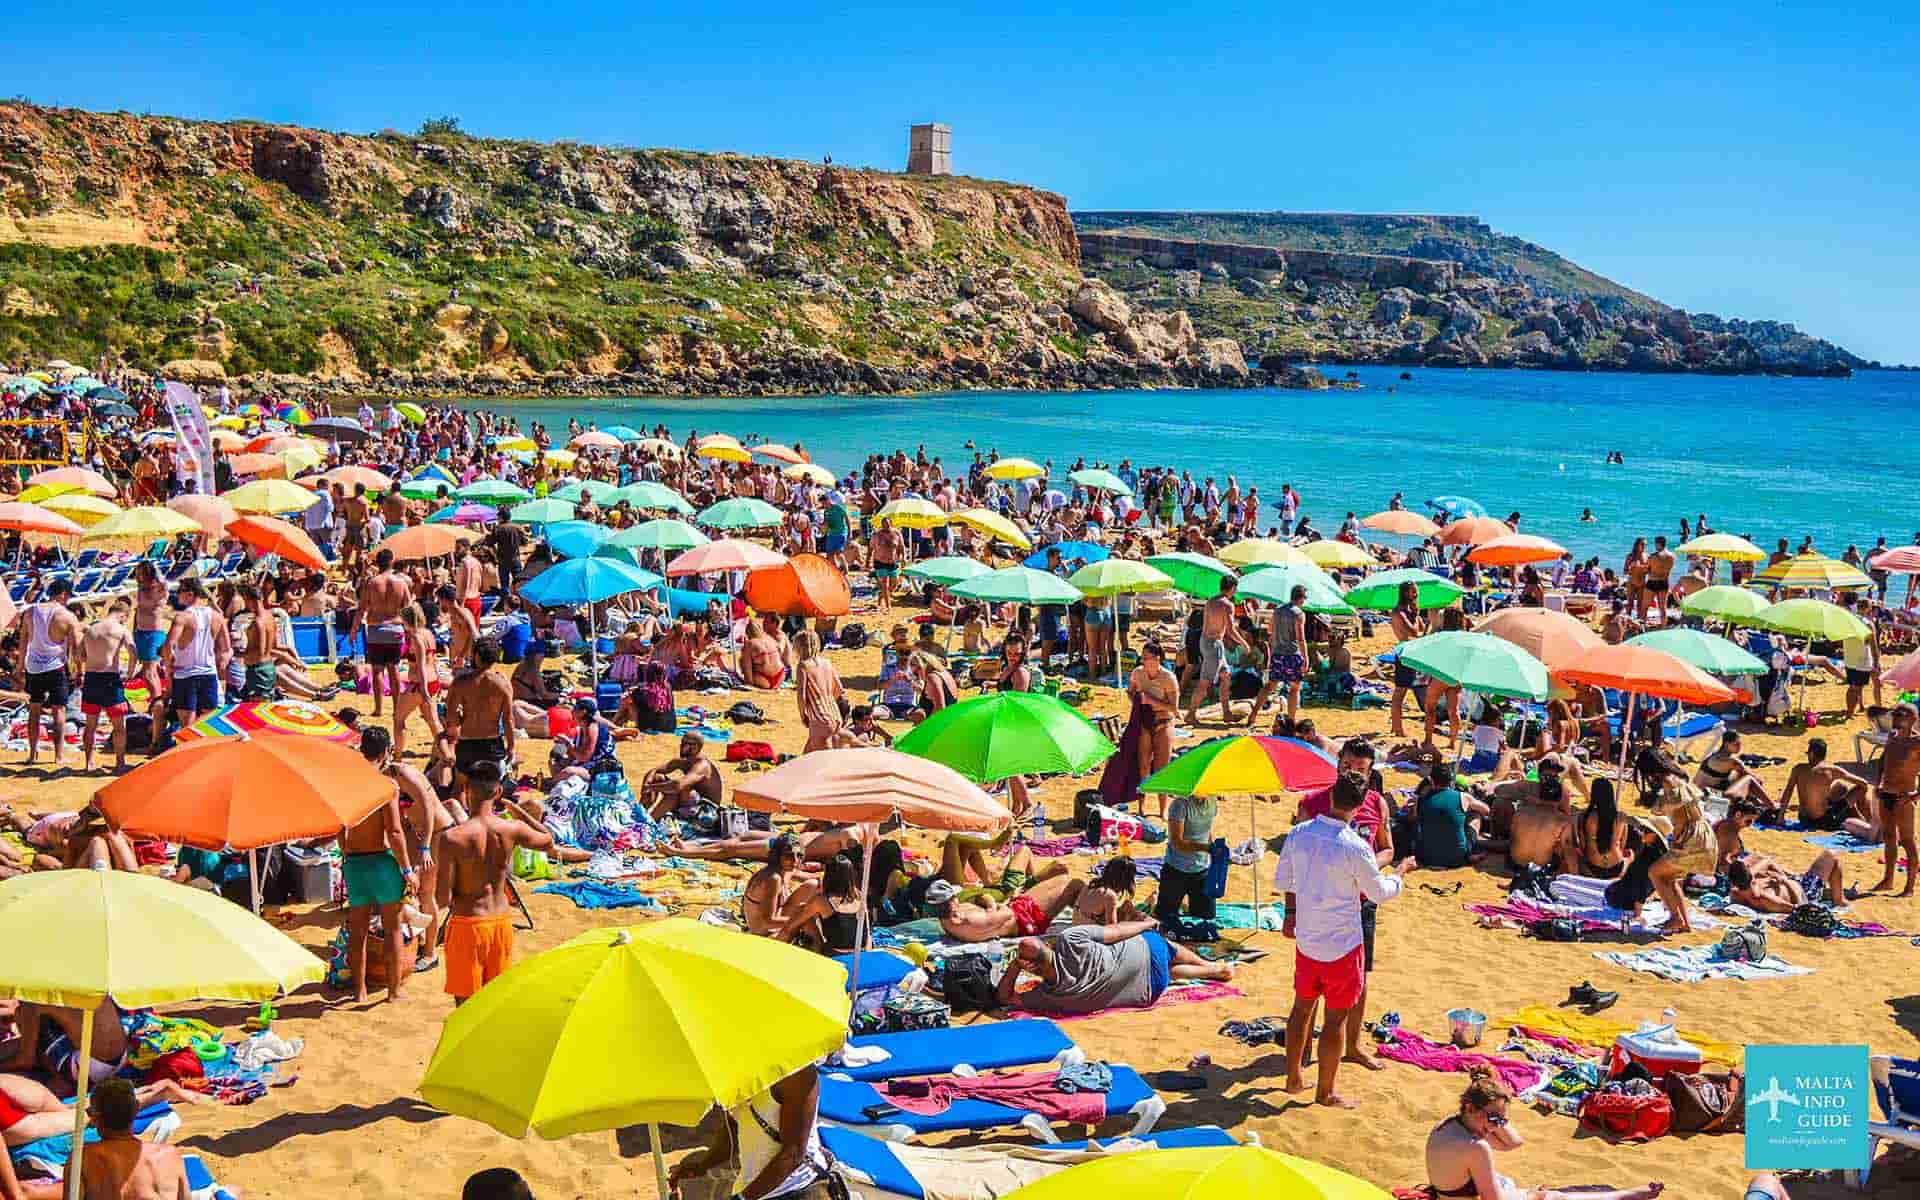 Golden Bay Malta packed with people enjoying their time at the beach.